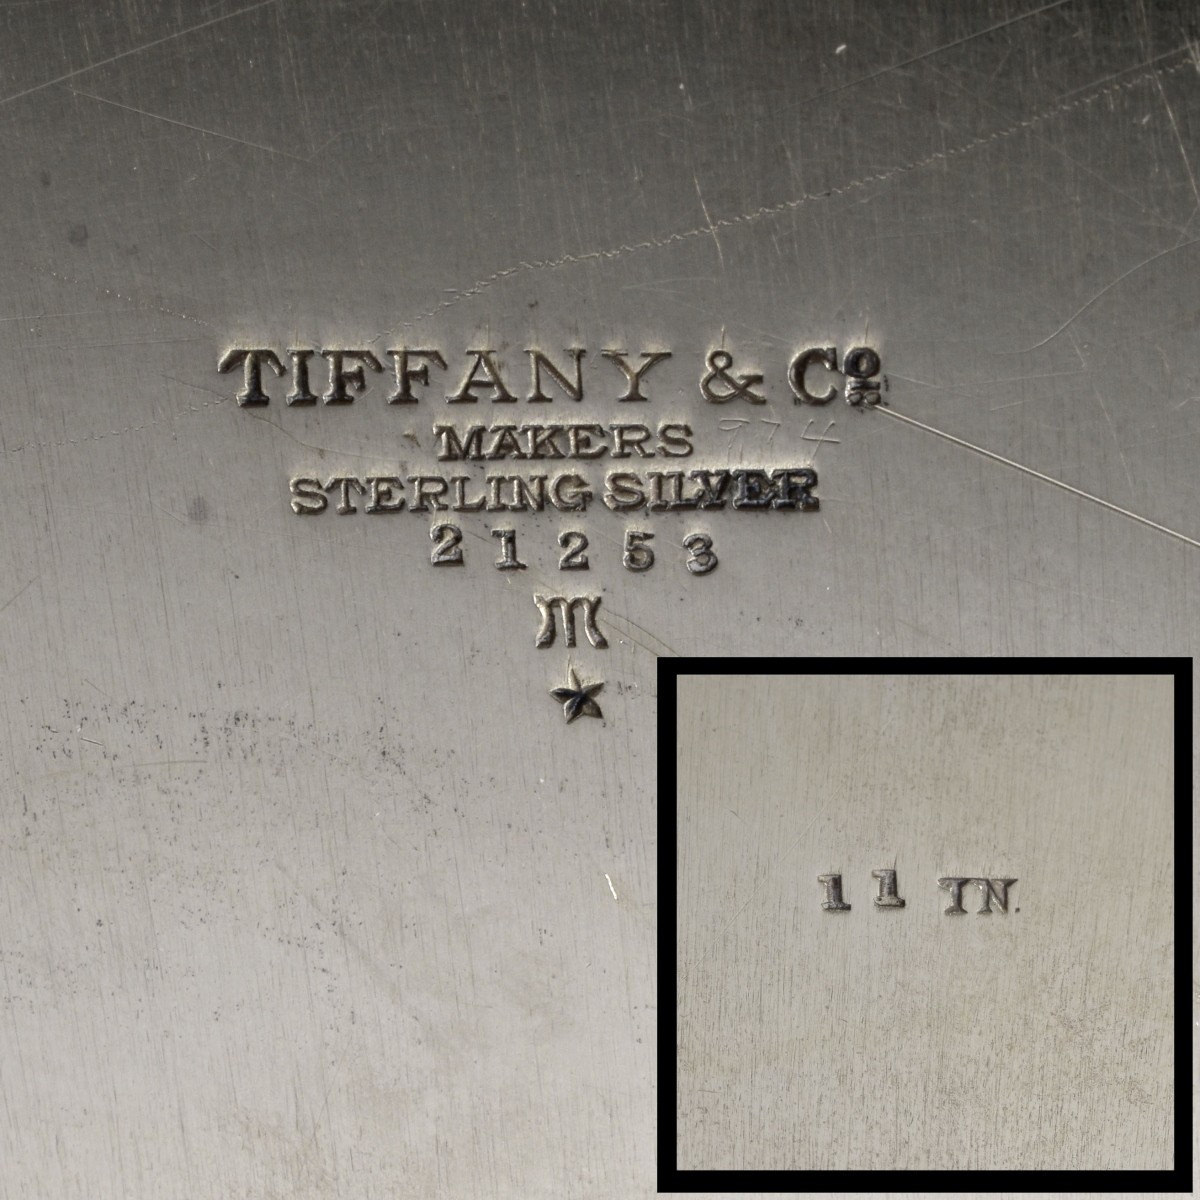 Tiffany & Co. Makers Sterling Serving Tray